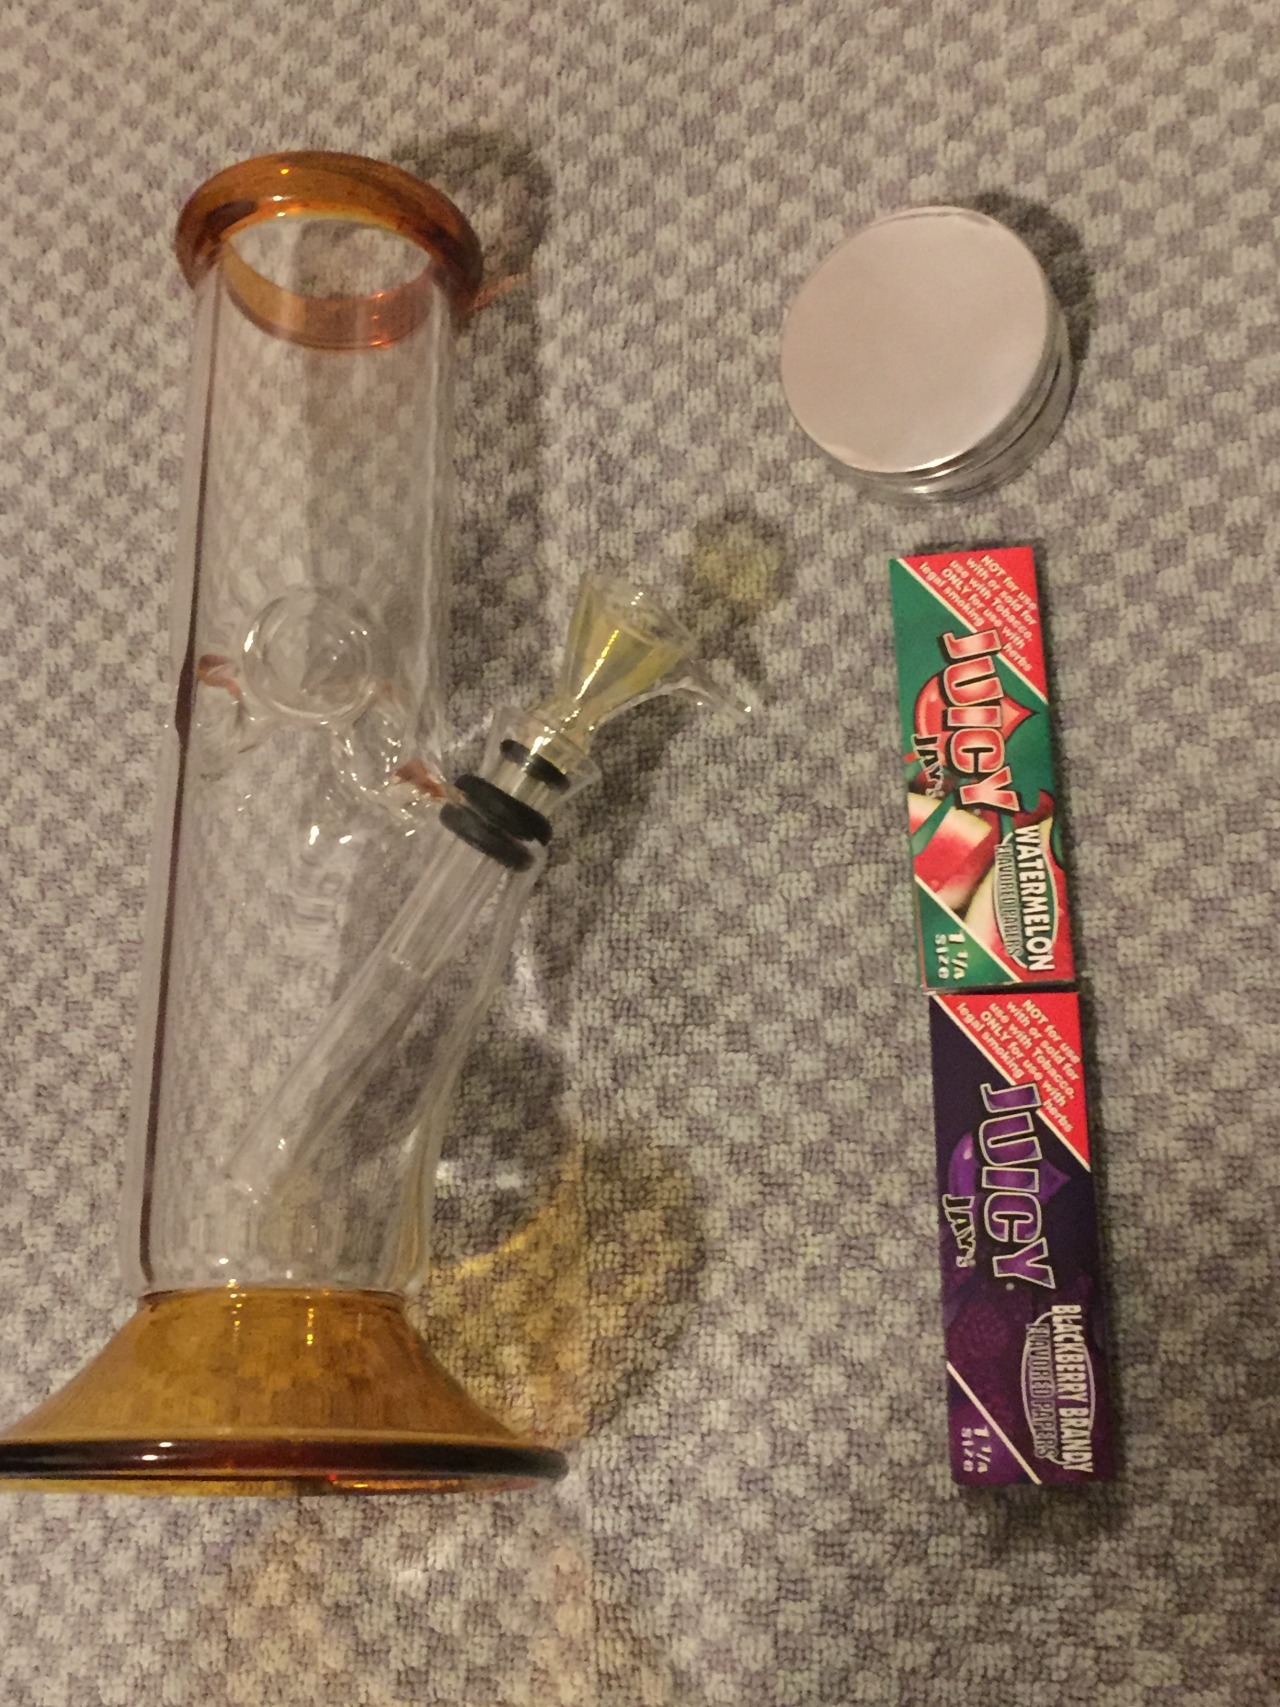 reeferkitten:  Giveaway includes:  Mini bong (8 inches) Juicy Jays  Grinder  Purple